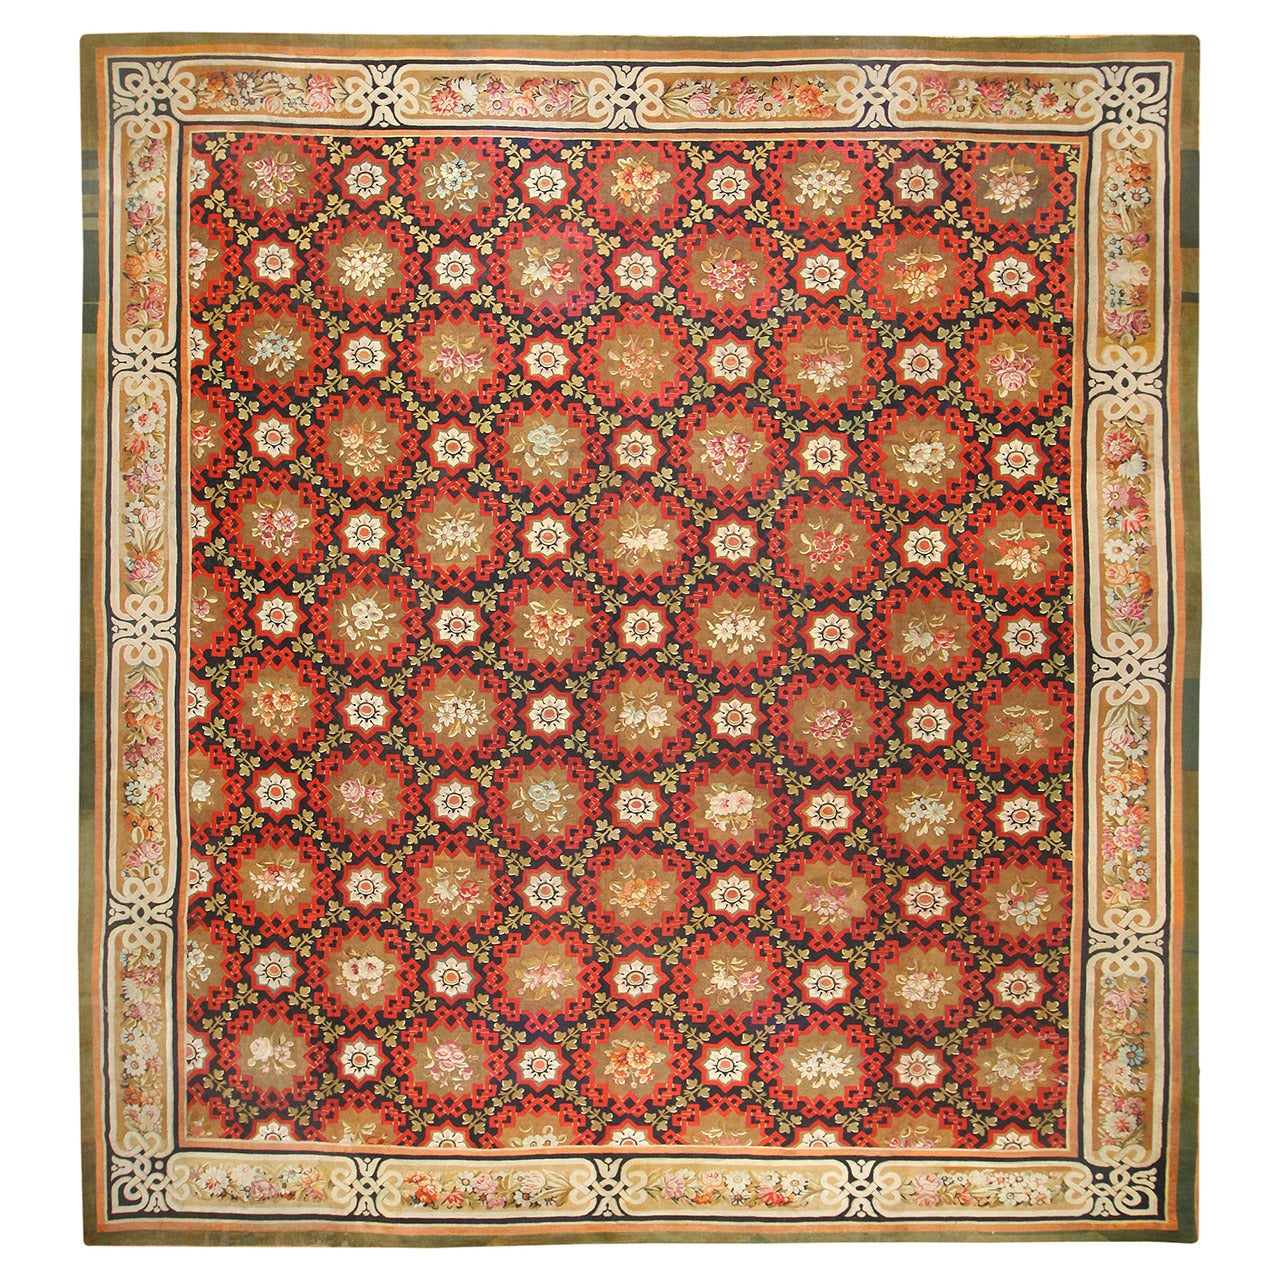 Antique French Aubusson Rug. Size: 17 ft x 18 ft 5 in